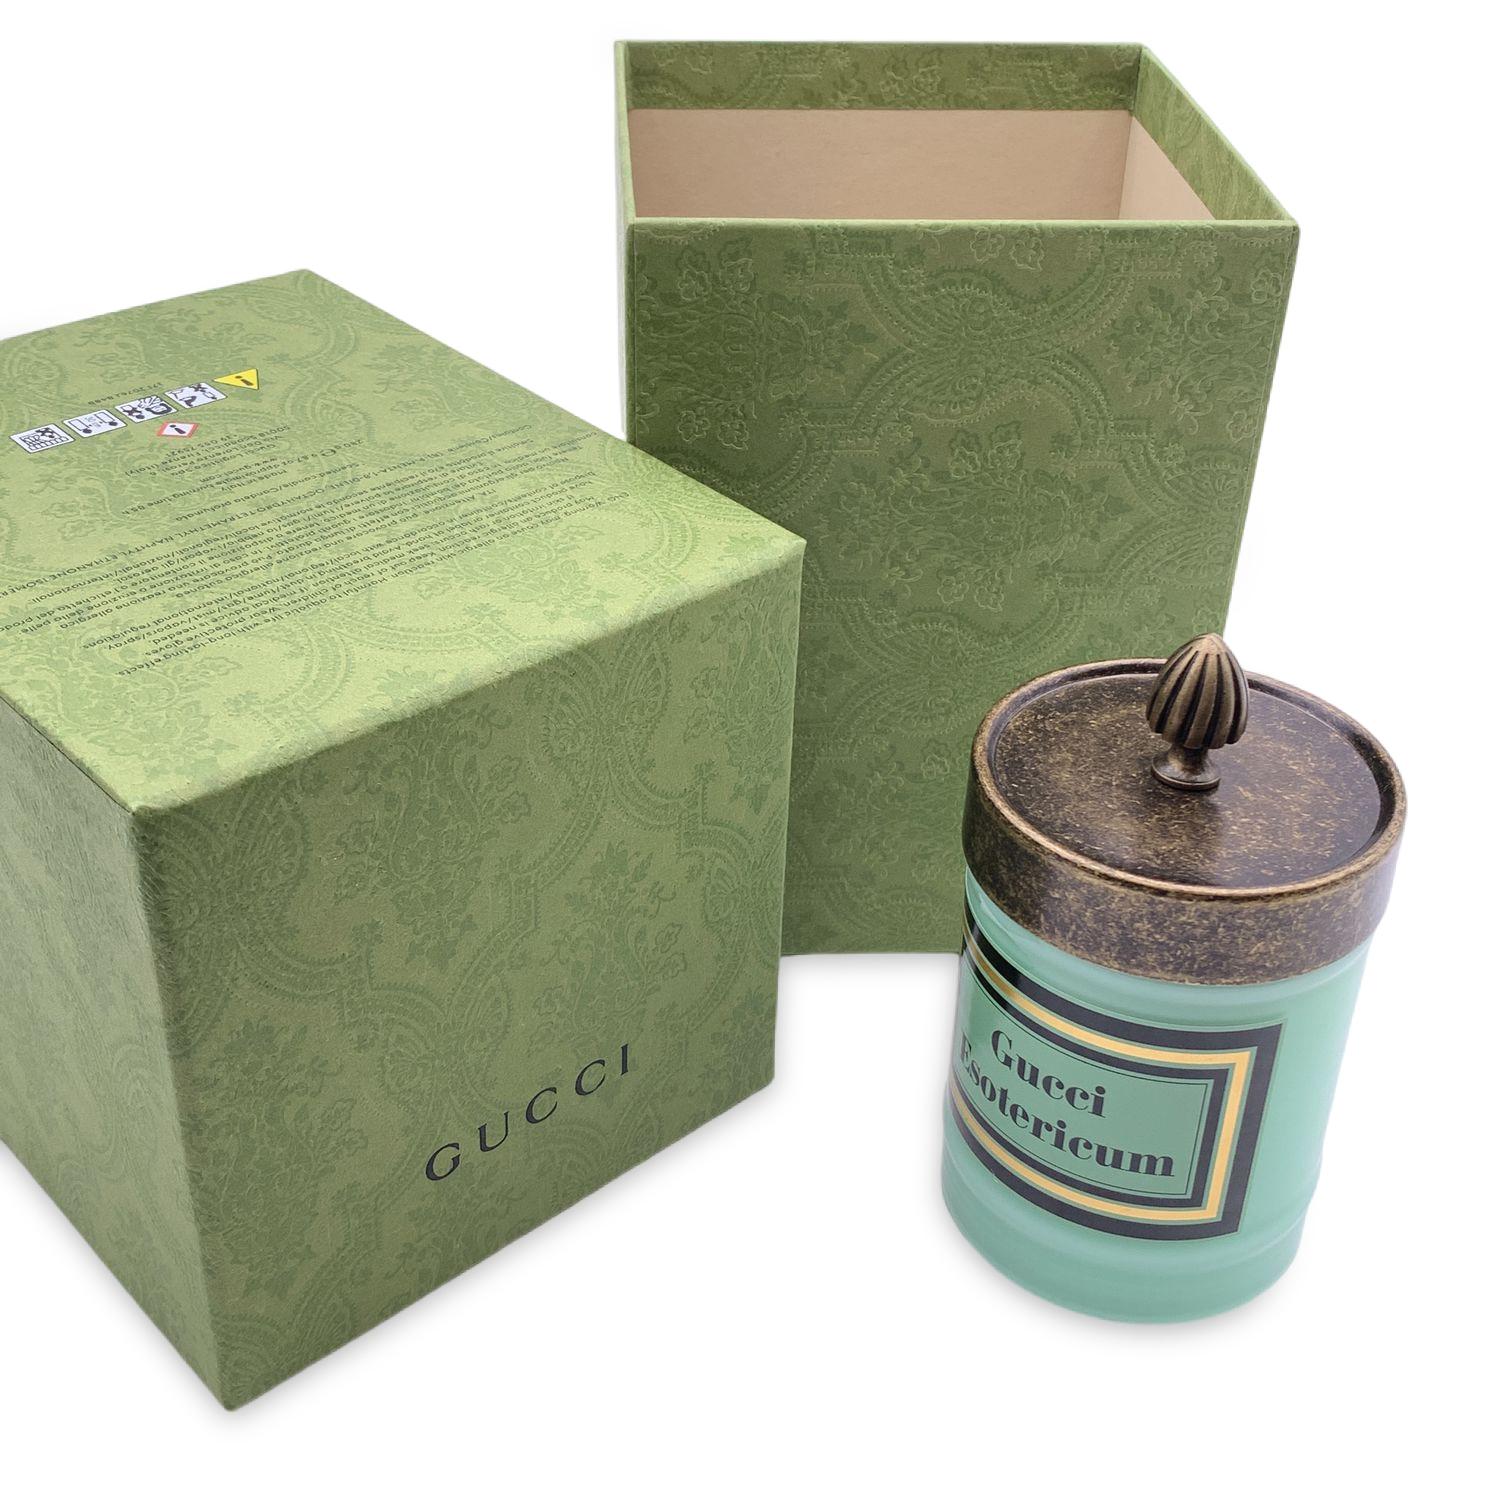 Beautiful Gucci 'Esotericum' Scented candle. Wax is scented with a blend of jasmine, bitter orange and leather notes. It features a metal lid with an engraved knob, and aqua green glass jar (it may be repurposed once the candle has burned out).Made